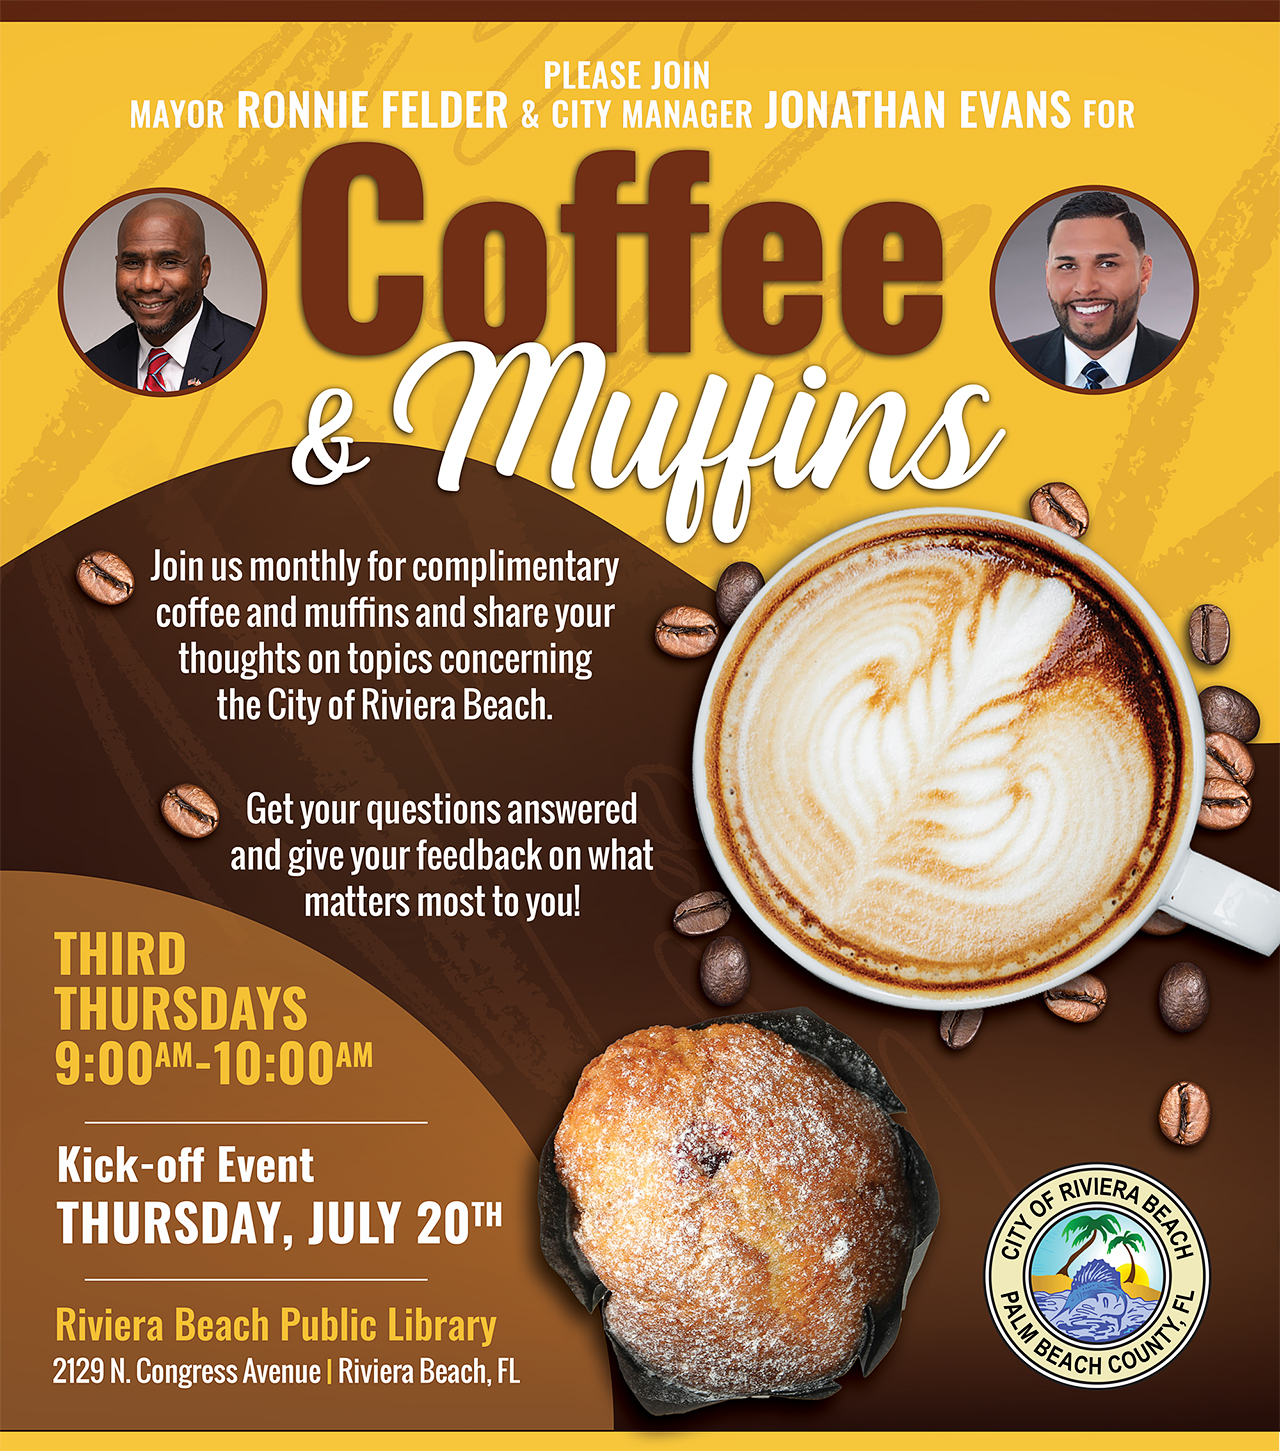 PLEASE JOIN MAYOR RONNIE FELDER & CITY MANAGER JONATHAN EVANS FOR Coffee Mugins Join us monthly for complimentary coffee and muffins and share your thoughts on topics concerning the City of Riviera Beach. Get your questions answered and give your feedback on what matters most to you! THIRD THURSDAYS 9:00AM-10:00AM Kick-off Event THURSDAY, JULY 20TH Riviera Beach Public Library 2129 N. Congress Avenue | Riviera Beach, FL